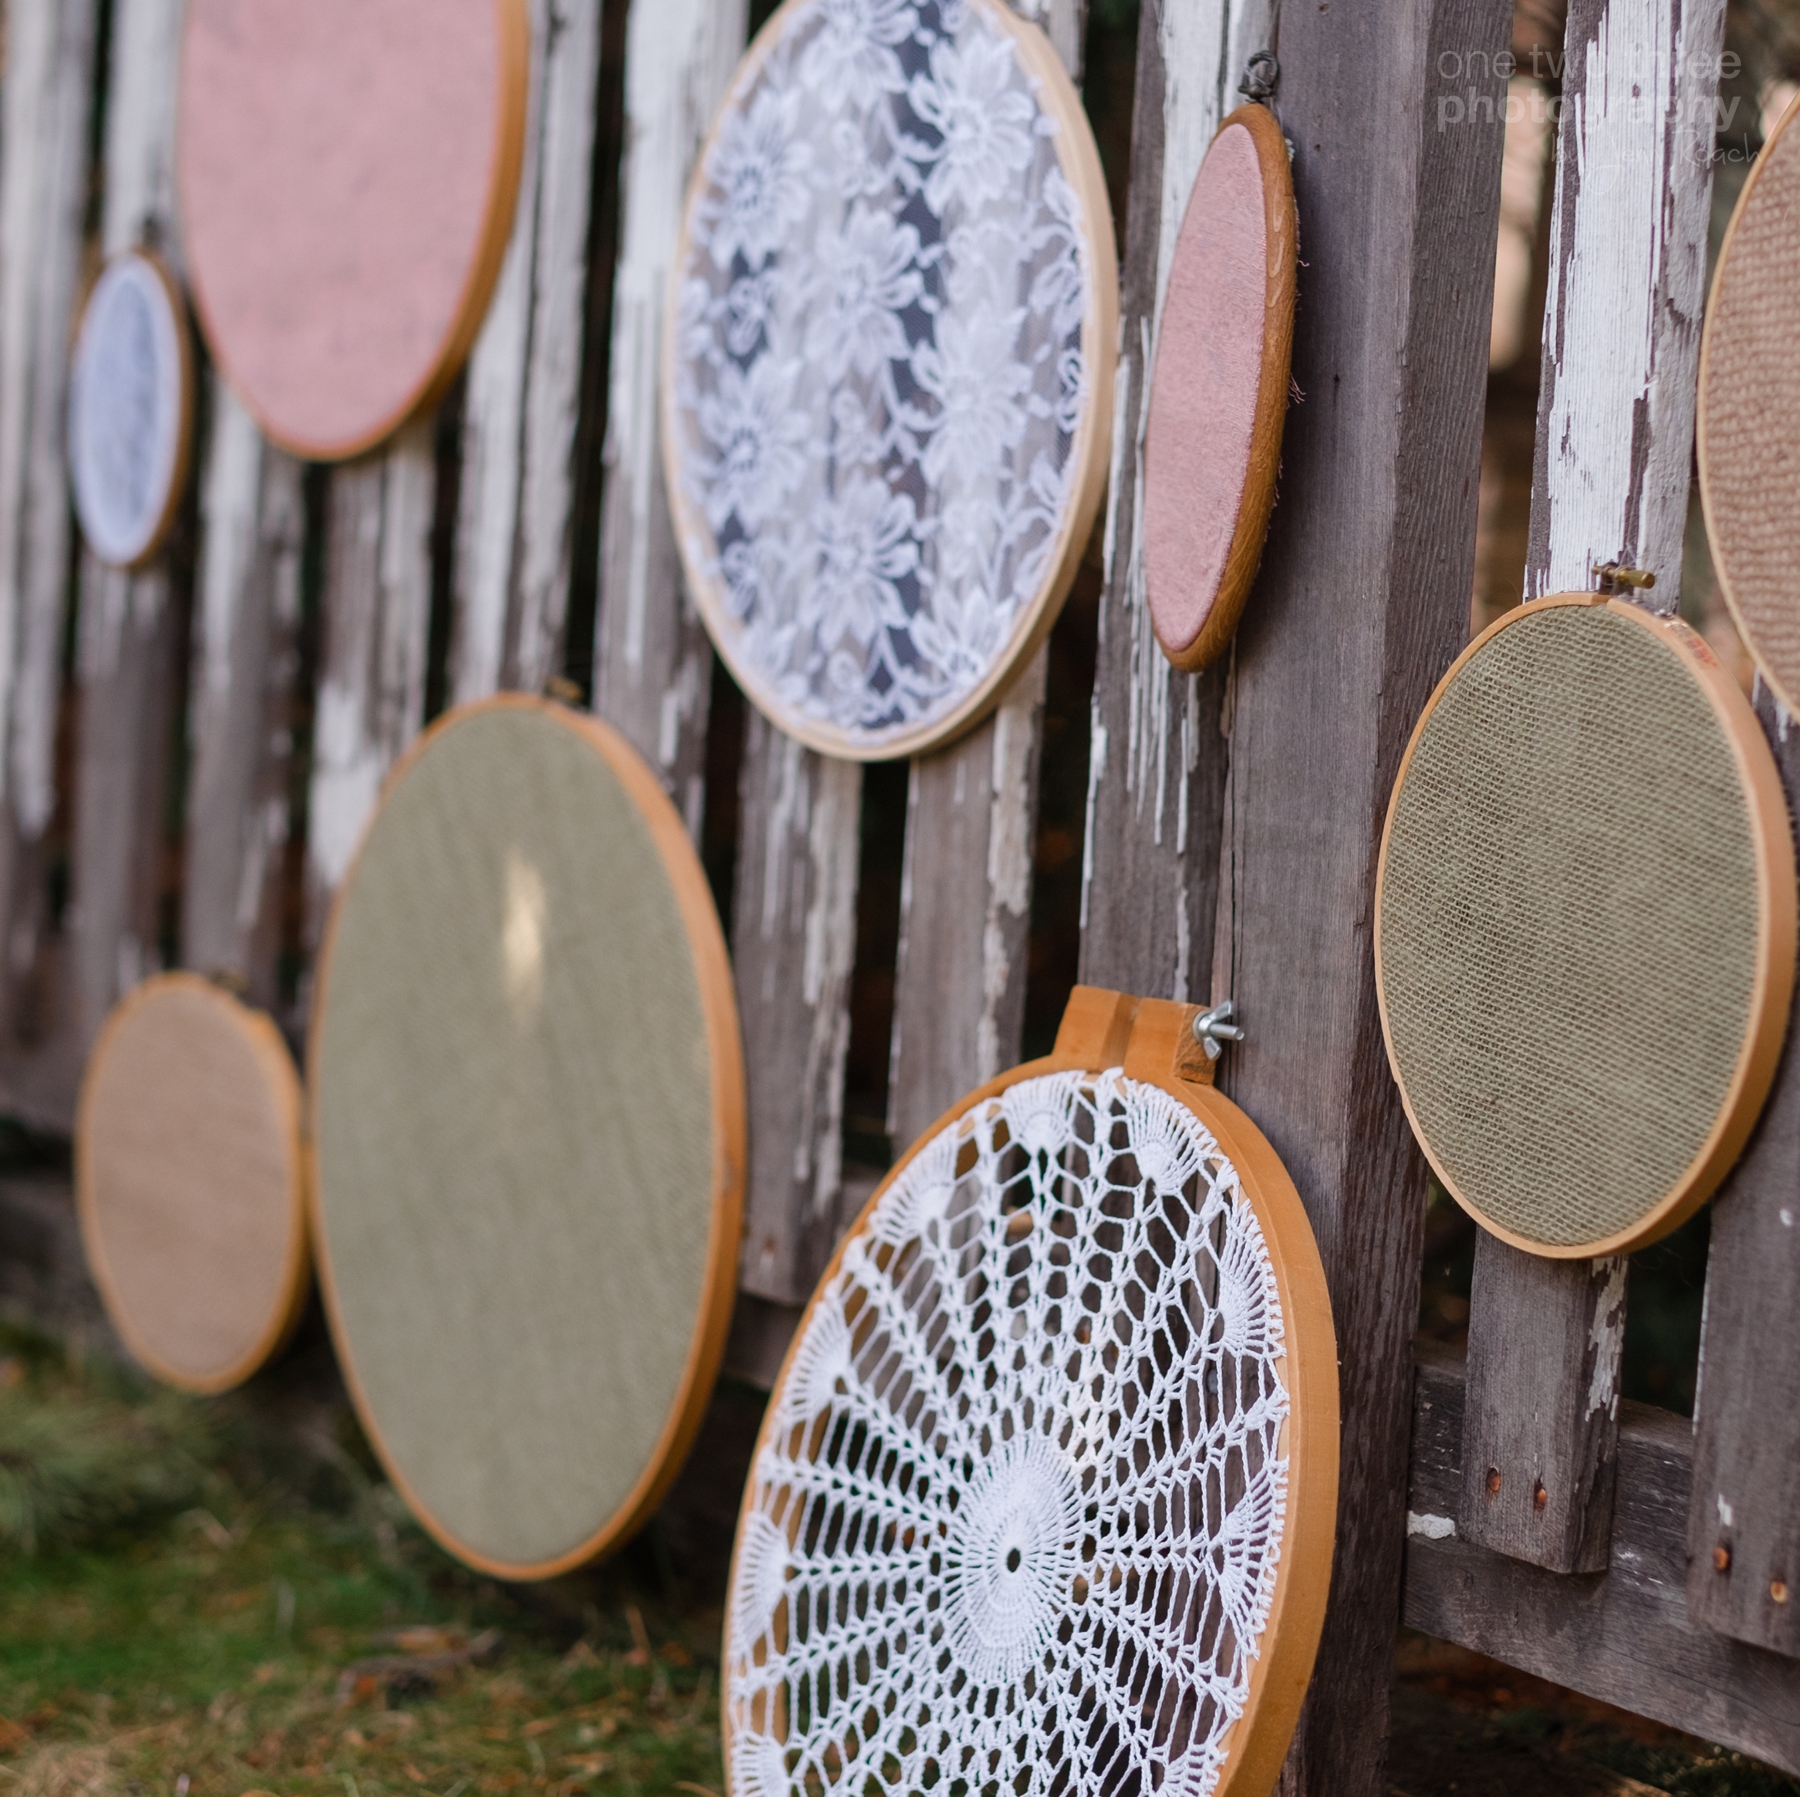 Lace and burlap inspired decor